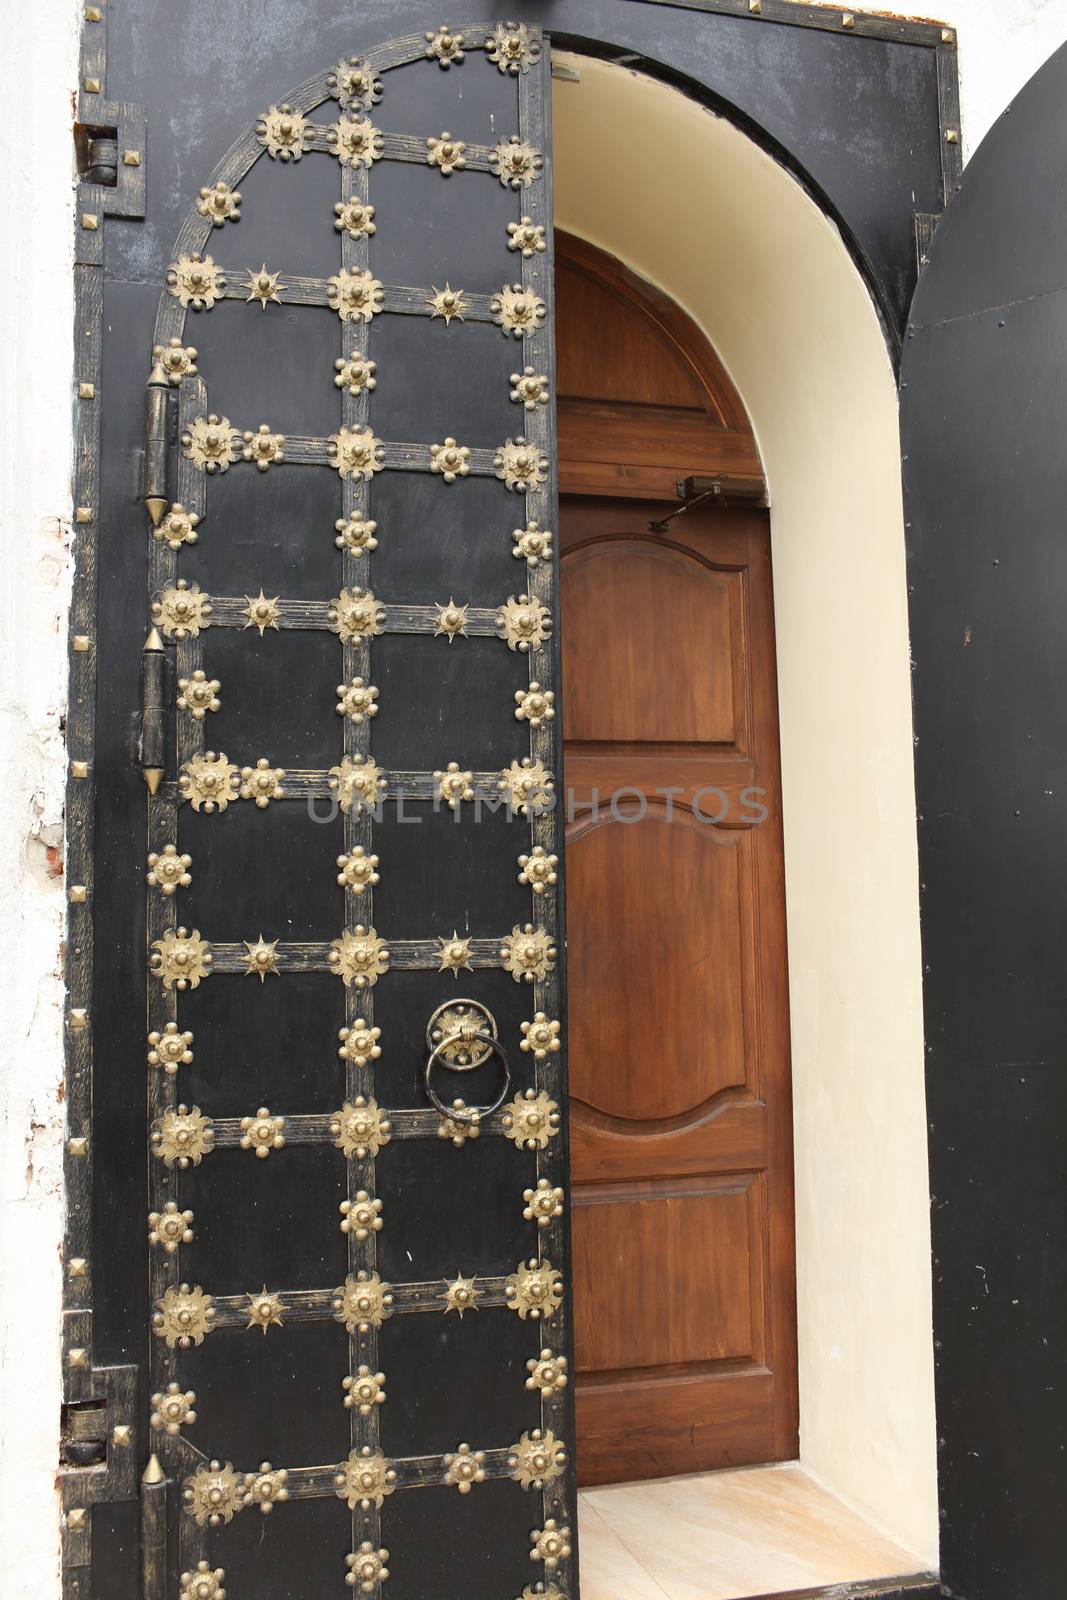 Ancient solid double doors open, decorated gold flowers